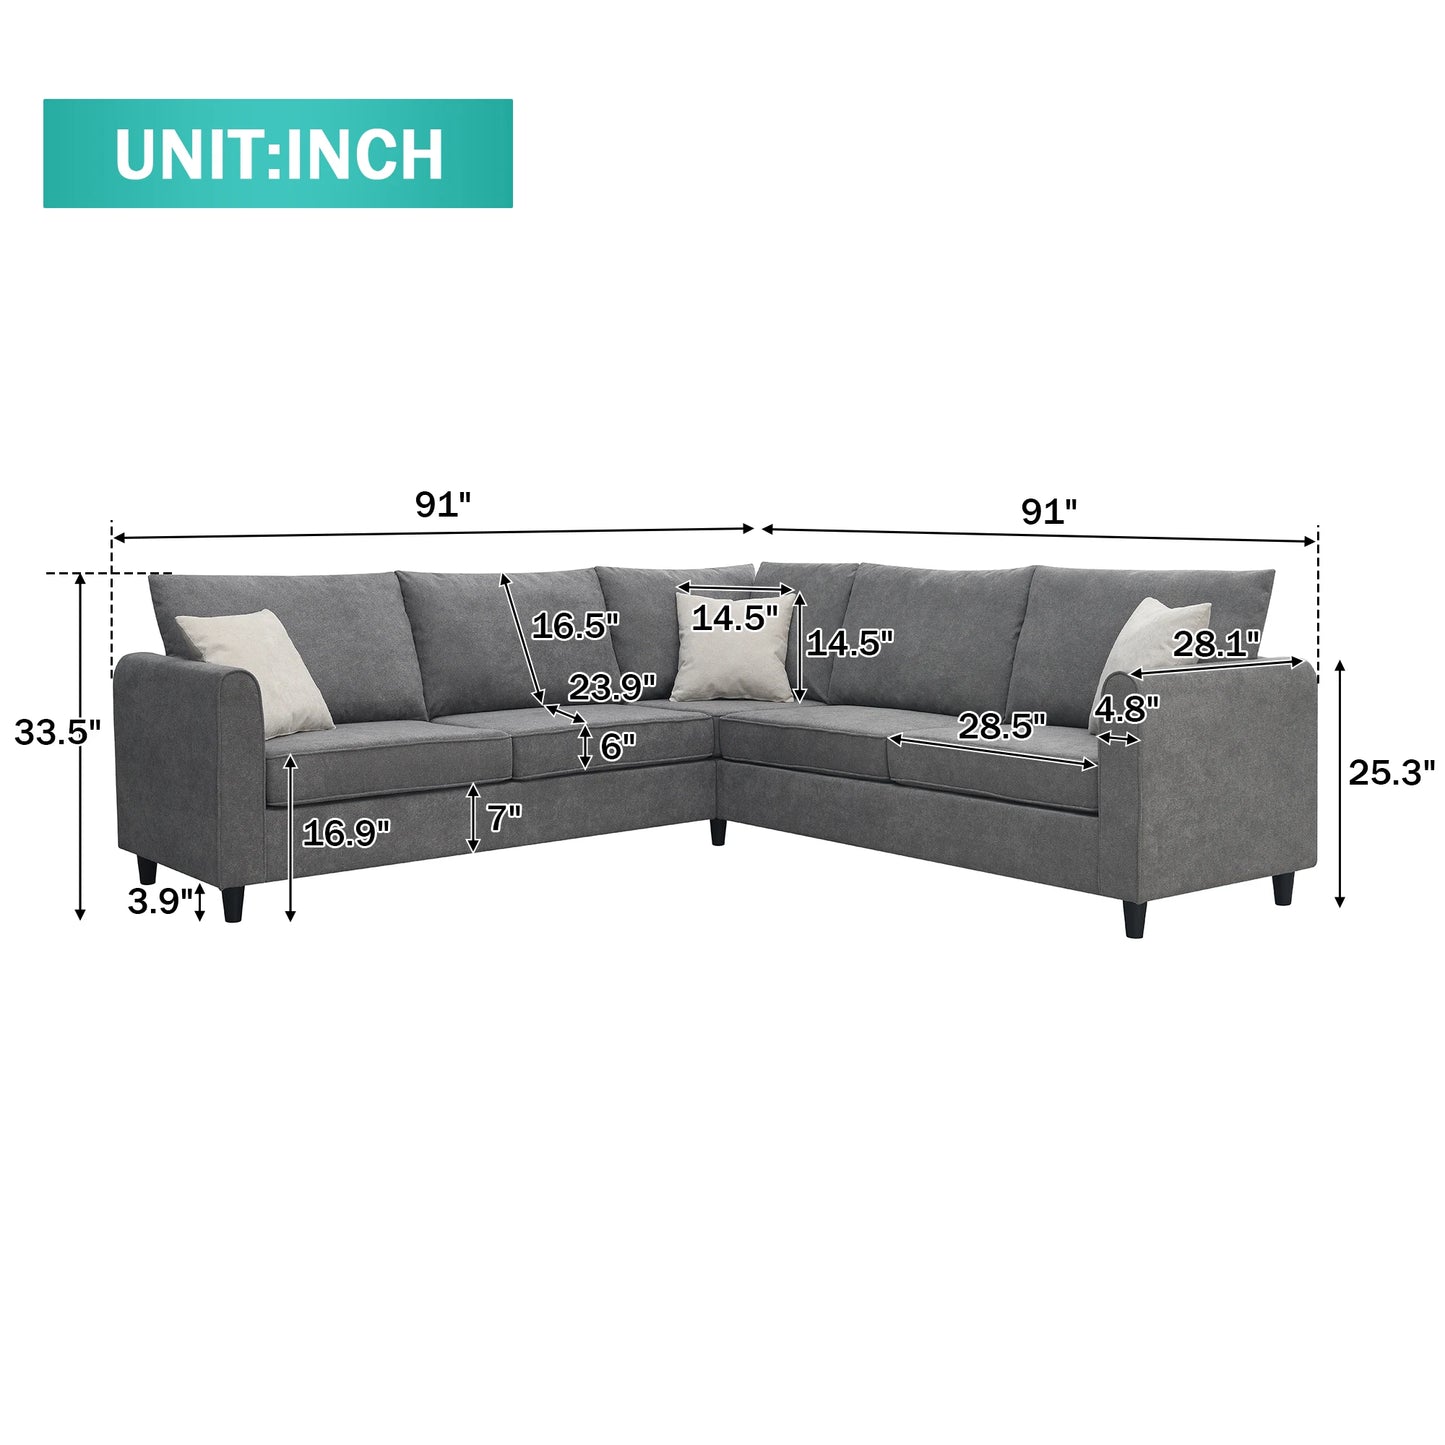 Modern Upholstered Living Room Sectional Sofa, L Shape Sofa Set with 3 Pillows